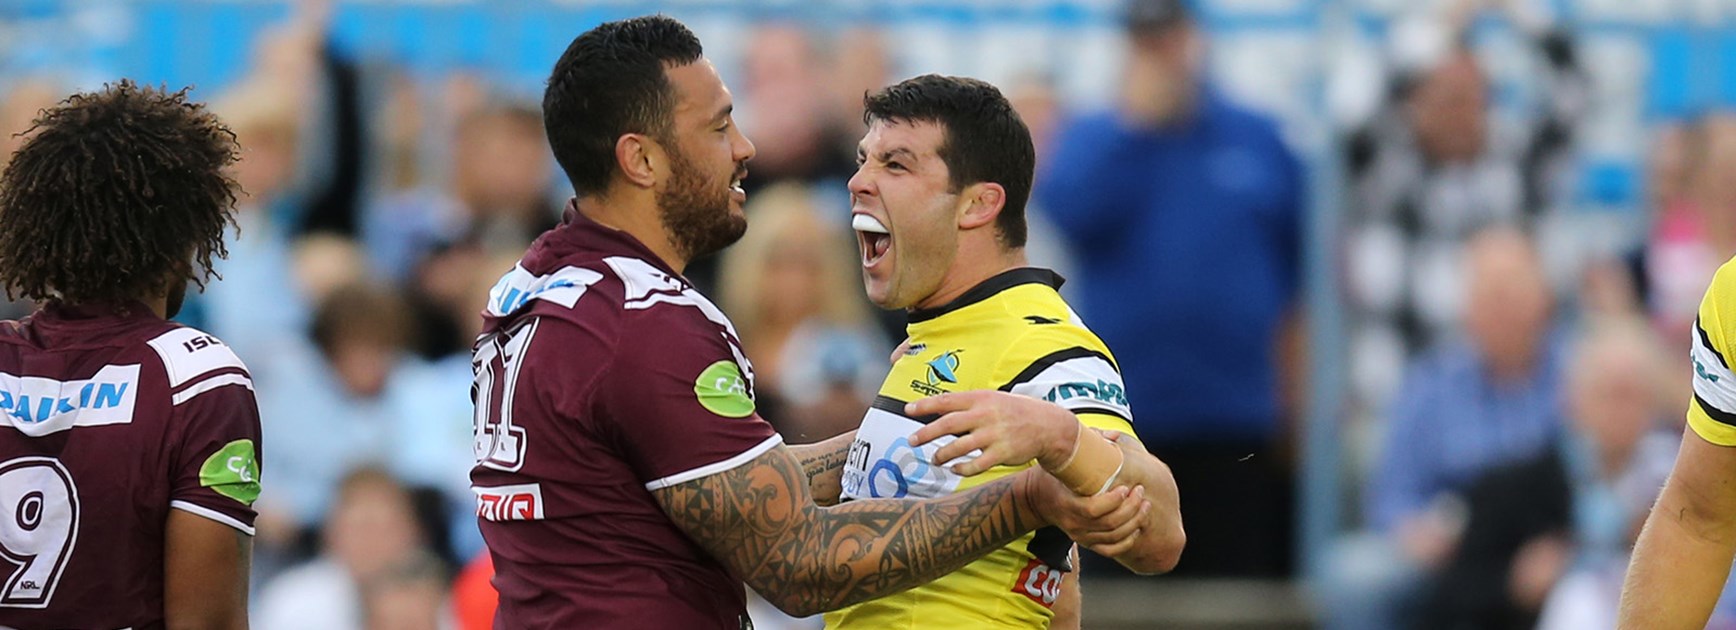 Feleti Mateo and Michael Ennis get up close and personal during Manly's clash with Cronulla.